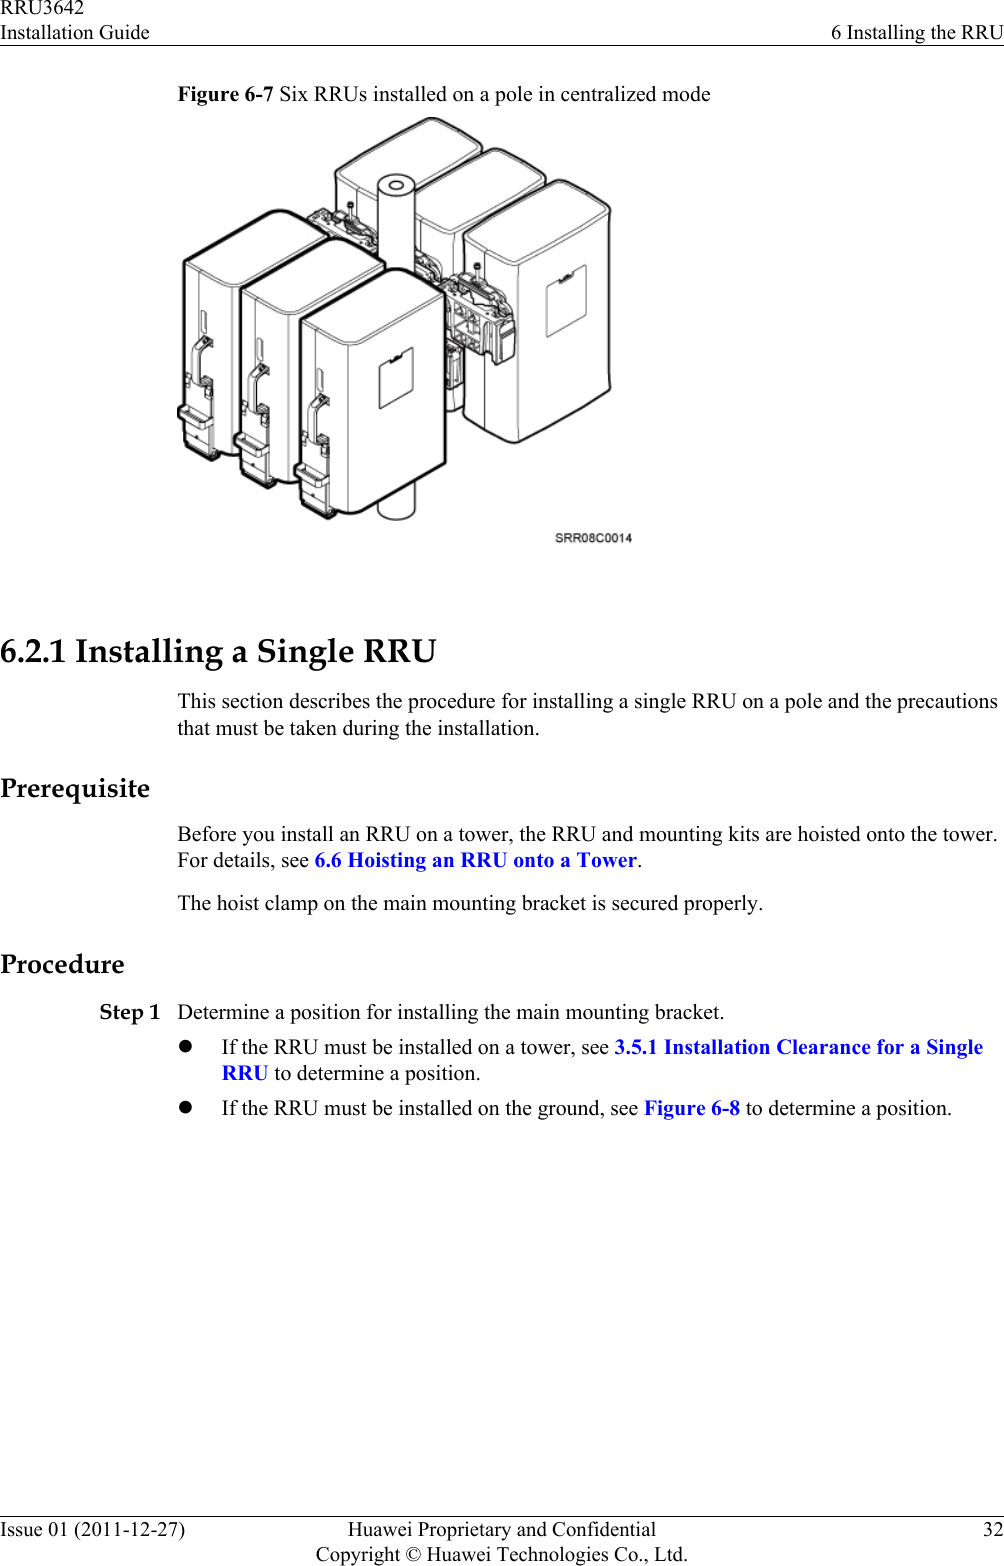 Figure 6-7 Six RRUs installed on a pole in centralized mode 6.2.1 Installing a Single RRUThis section describes the procedure for installing a single RRU on a pole and the precautionsthat must be taken during the installation.PrerequisiteBefore you install an RRU on a tower, the RRU and mounting kits are hoisted onto the tower.For details, see 6.6 Hoisting an RRU onto a Tower.The hoist clamp on the main mounting bracket is secured properly.ProcedureStep 1 Determine a position for installing the main mounting bracket.lIf the RRU must be installed on a tower, see 3.5.1 Installation Clearance for a SingleRRU to determine a position.lIf the RRU must be installed on the ground, see Figure 6-8 to determine a position.RRU3642Installation Guide 6 Installing the RRUIssue 01 (2011-12-27) Huawei Proprietary and ConfidentialCopyright © Huawei Technologies Co., Ltd.32